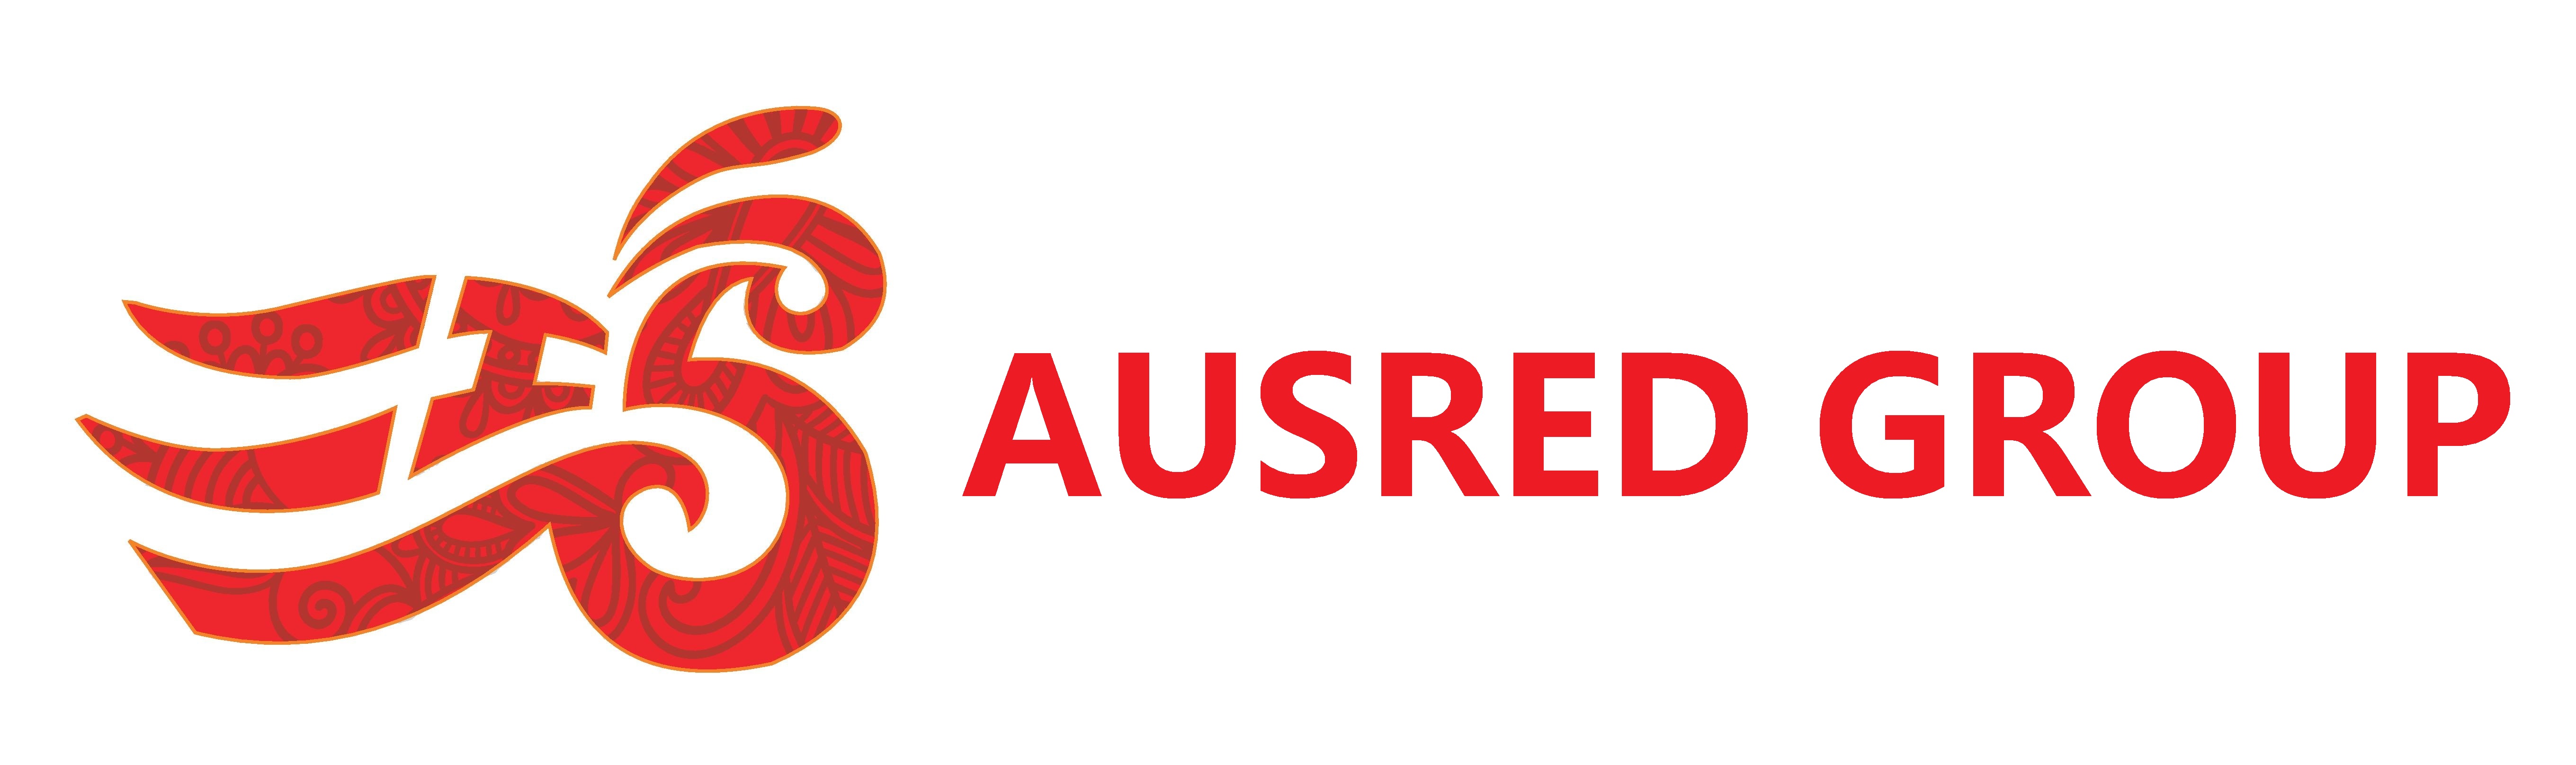 Ausred Group